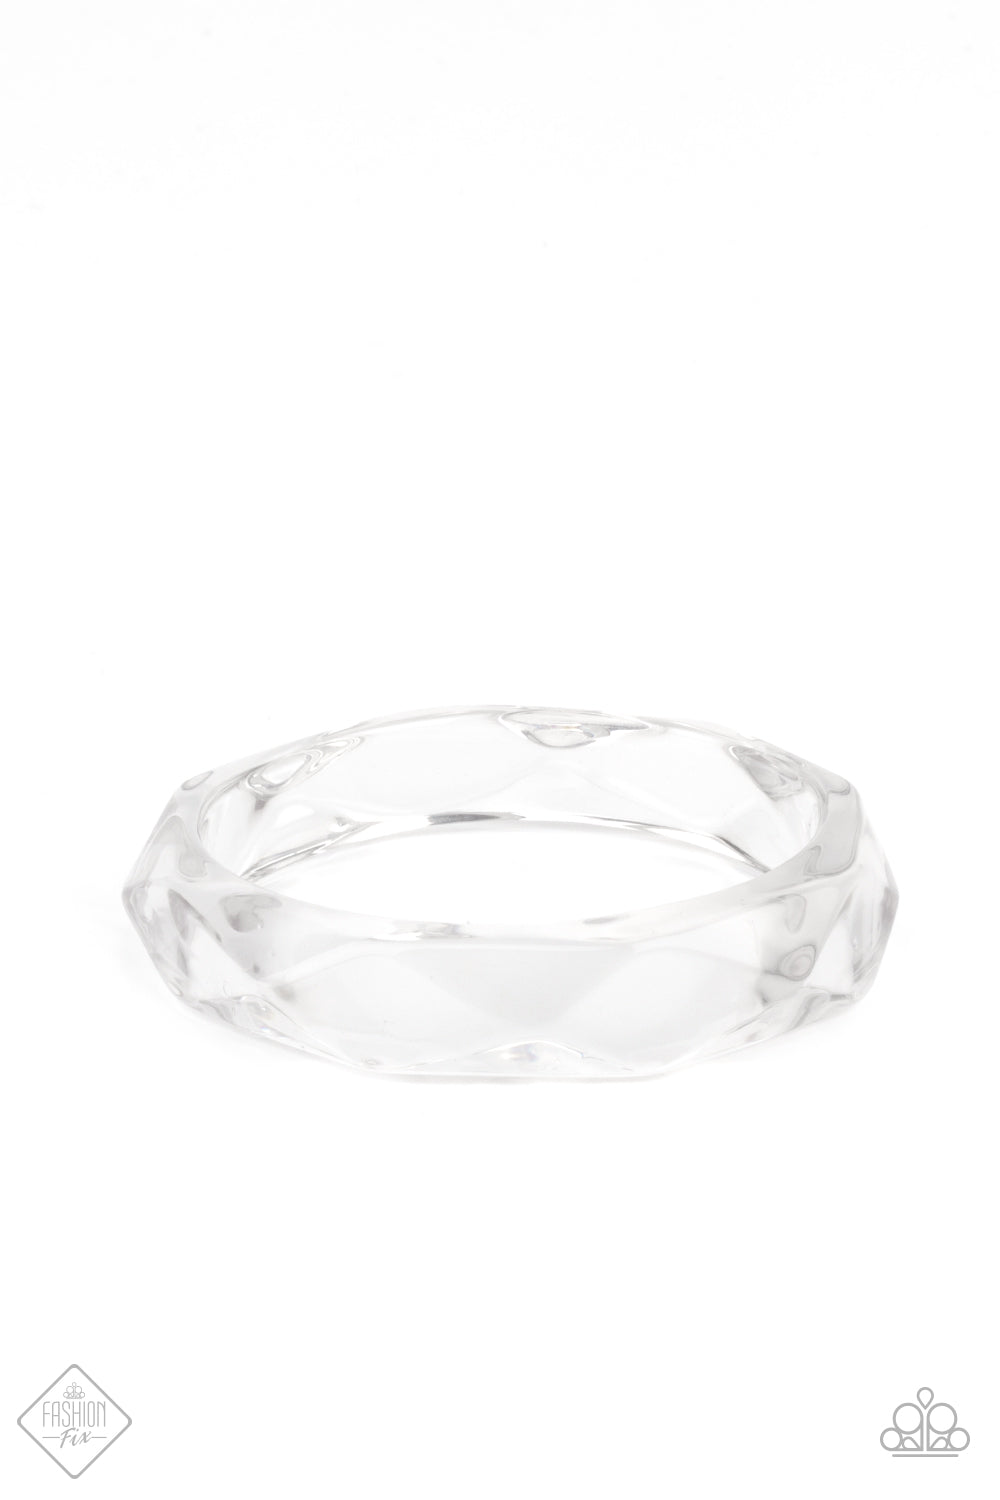 Paparazzi Clear-Cut Couture - White Fashion Fix Bracelet - A Finishing Touch Jewelry